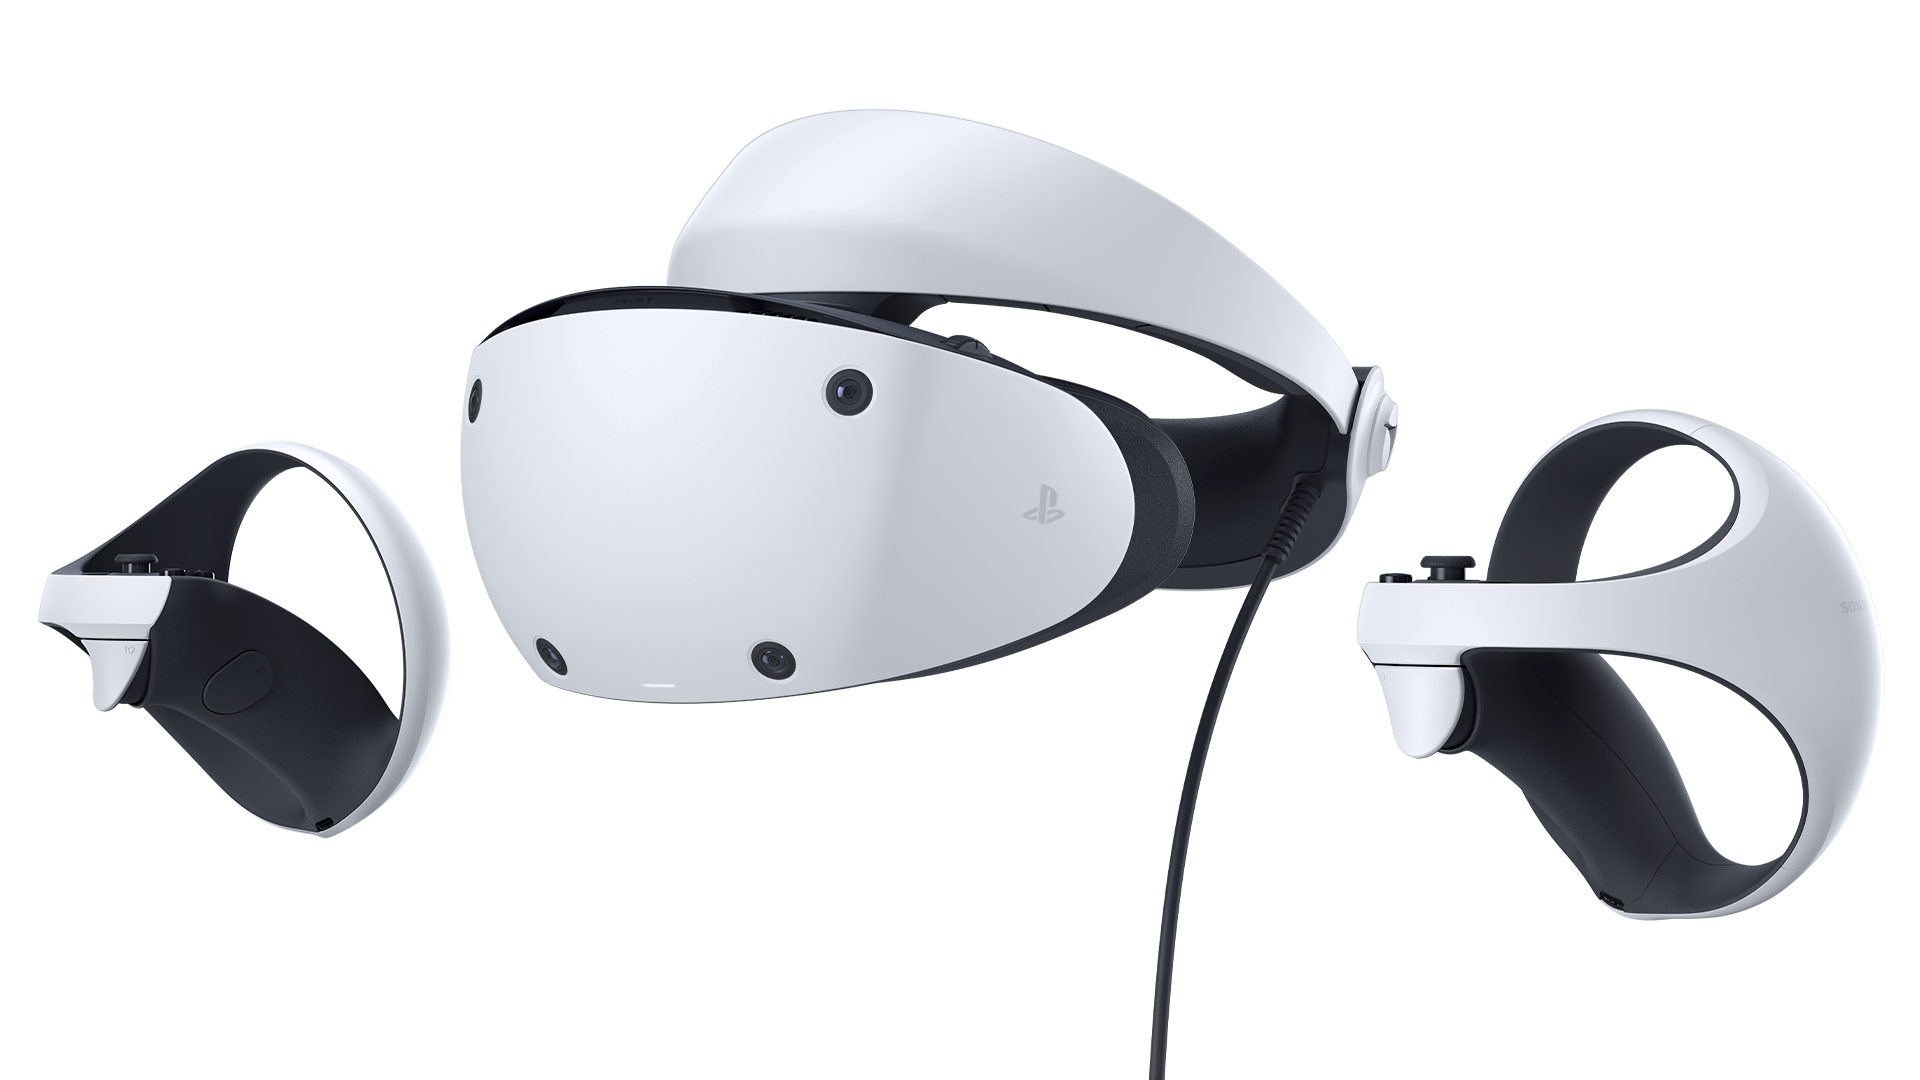 Image of PlayStation VR2 headset and Sense controllers